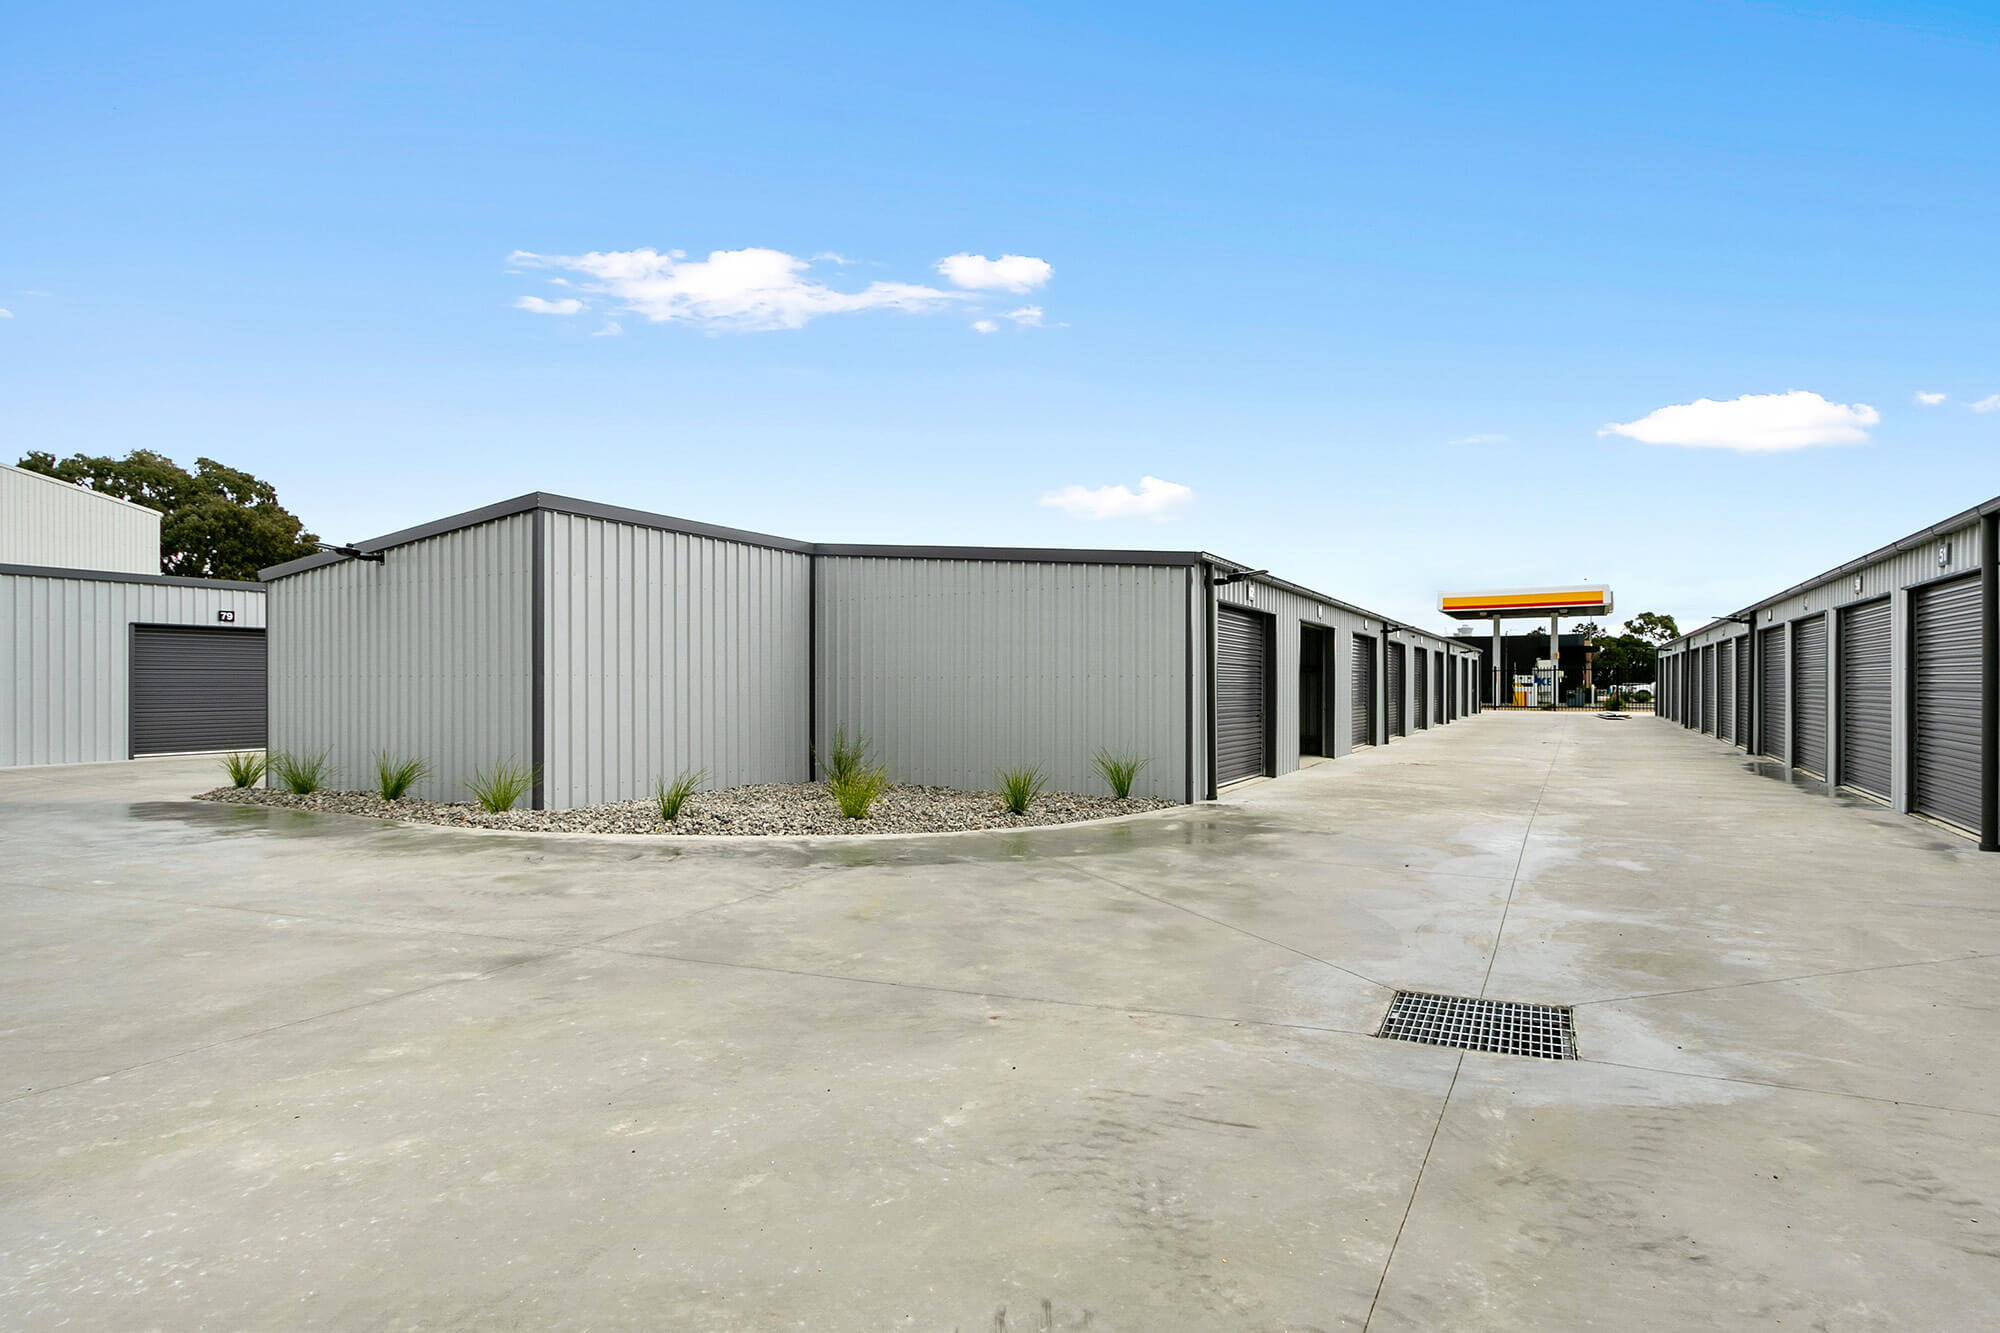 Photo of new storage shed facility, with rows of grey storage shed with black roller doors